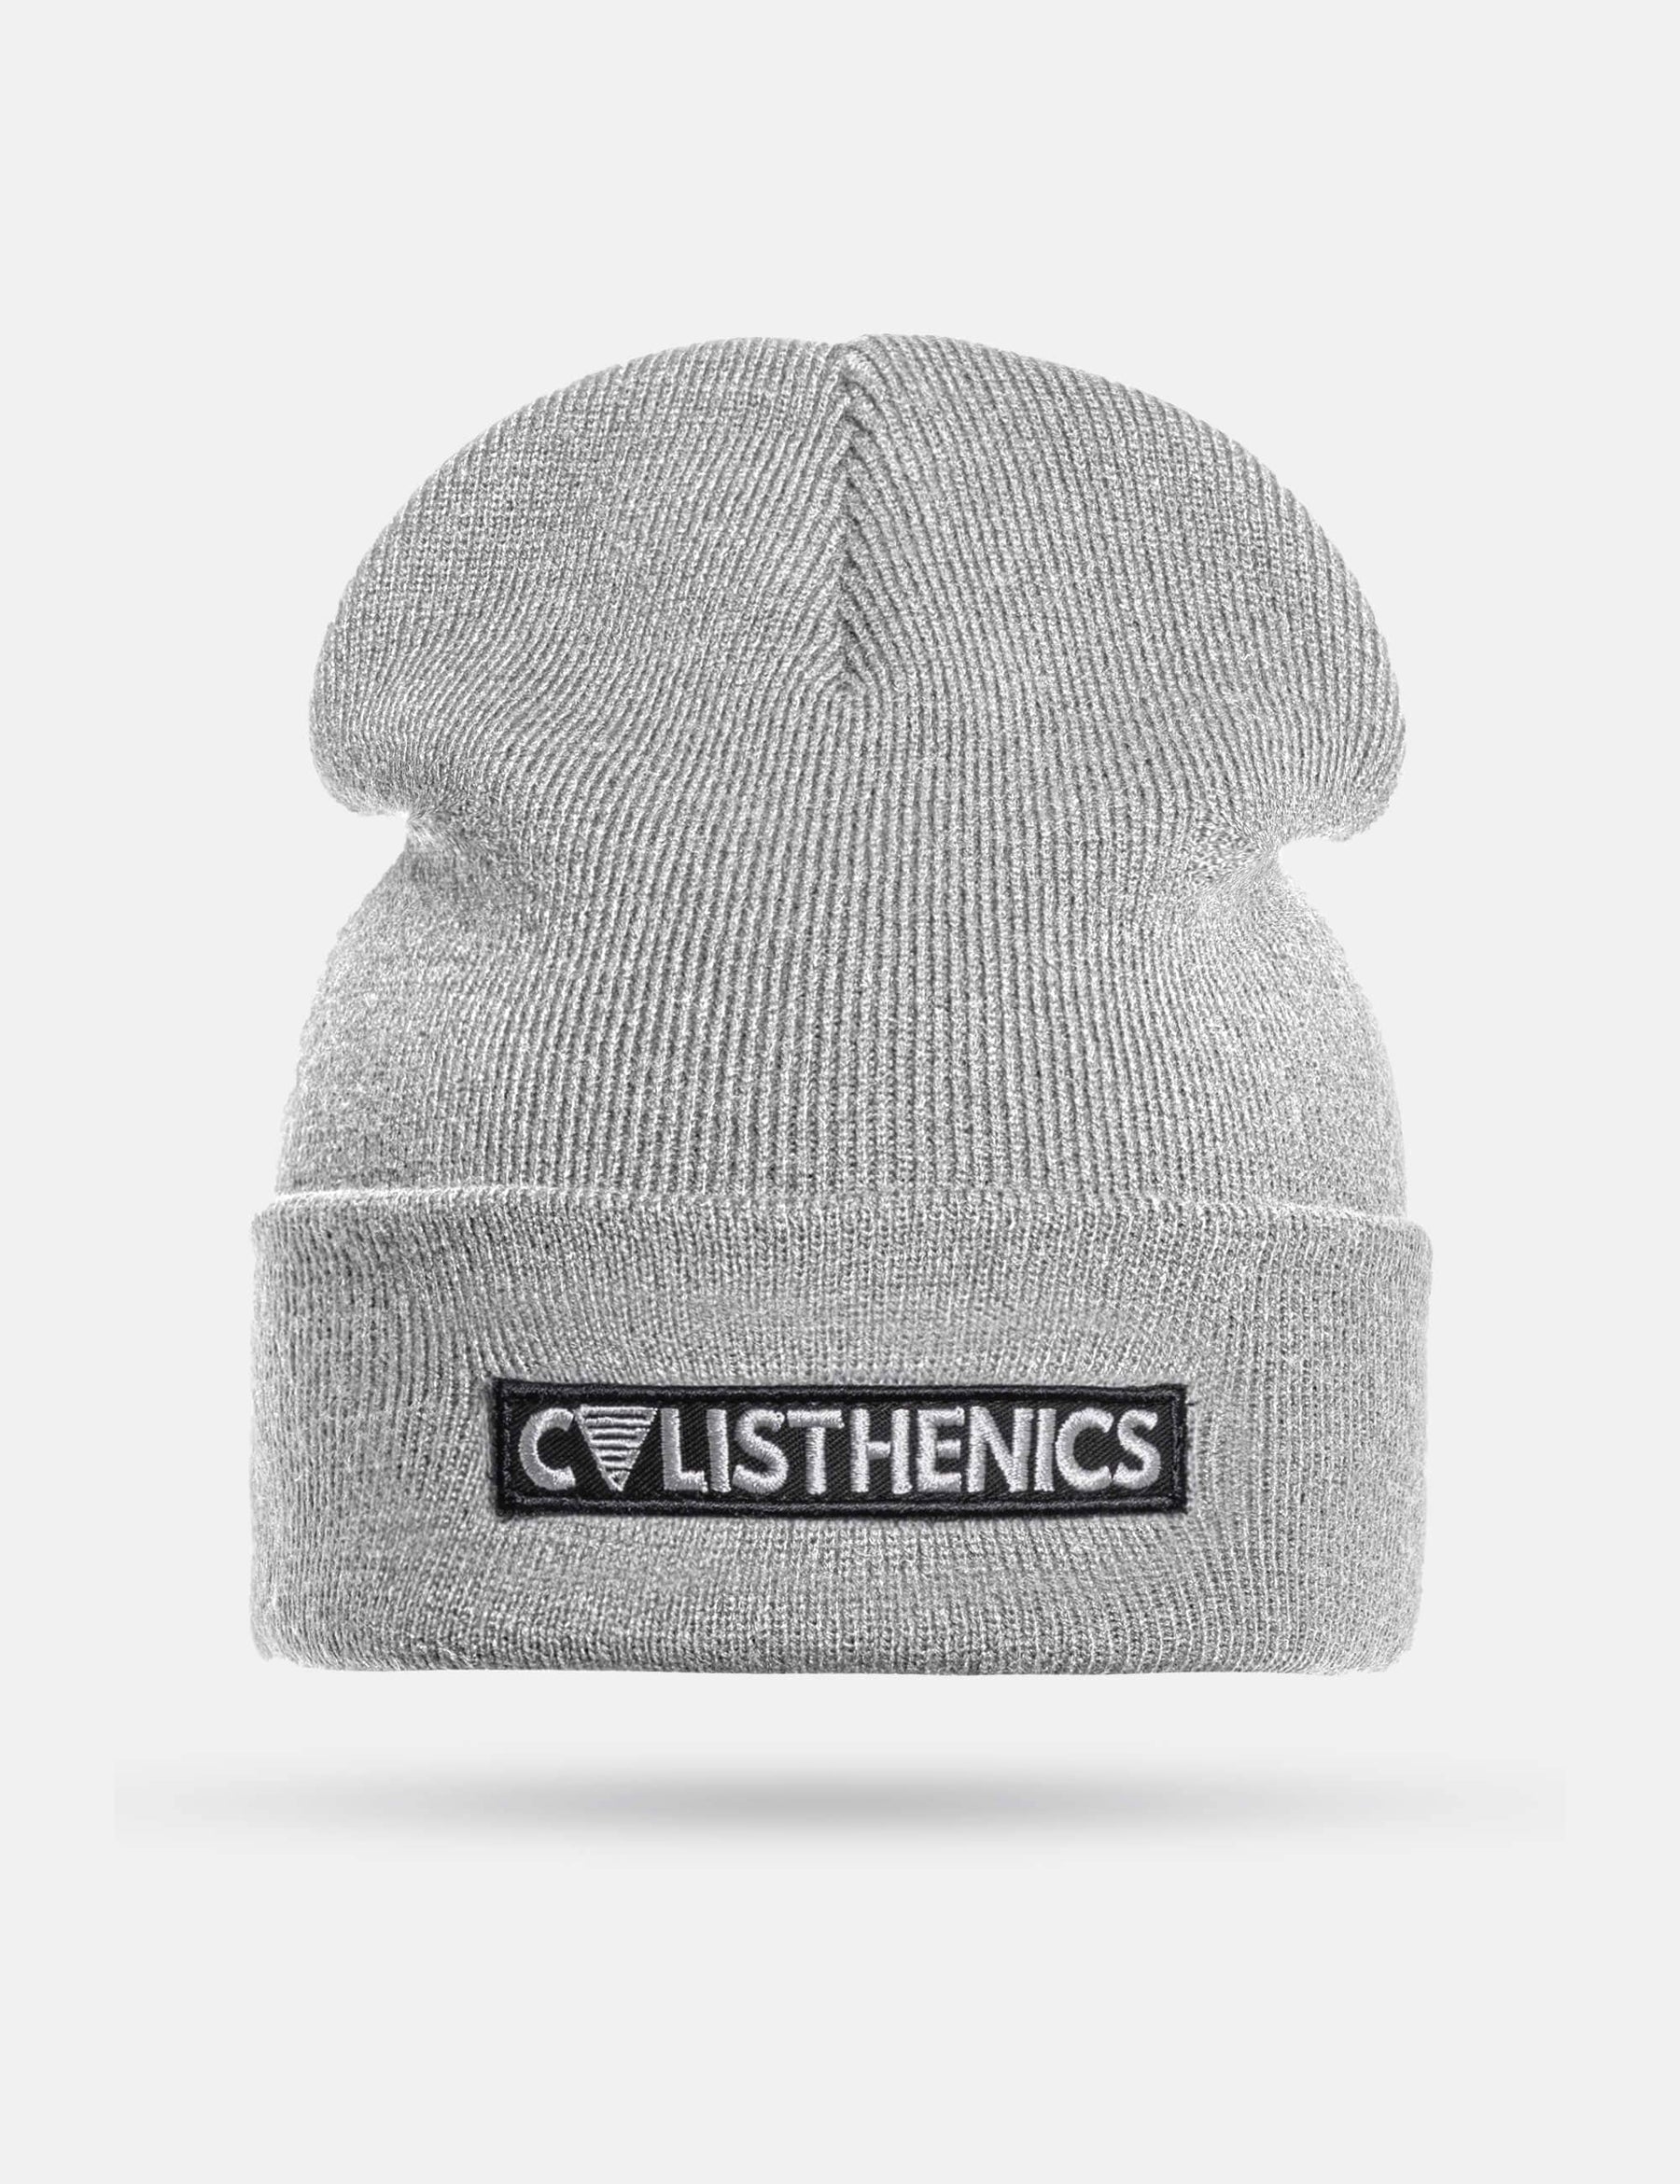 High quality light grey Calisthenics beanie from gornation. detailed overview from the product by Gornation.